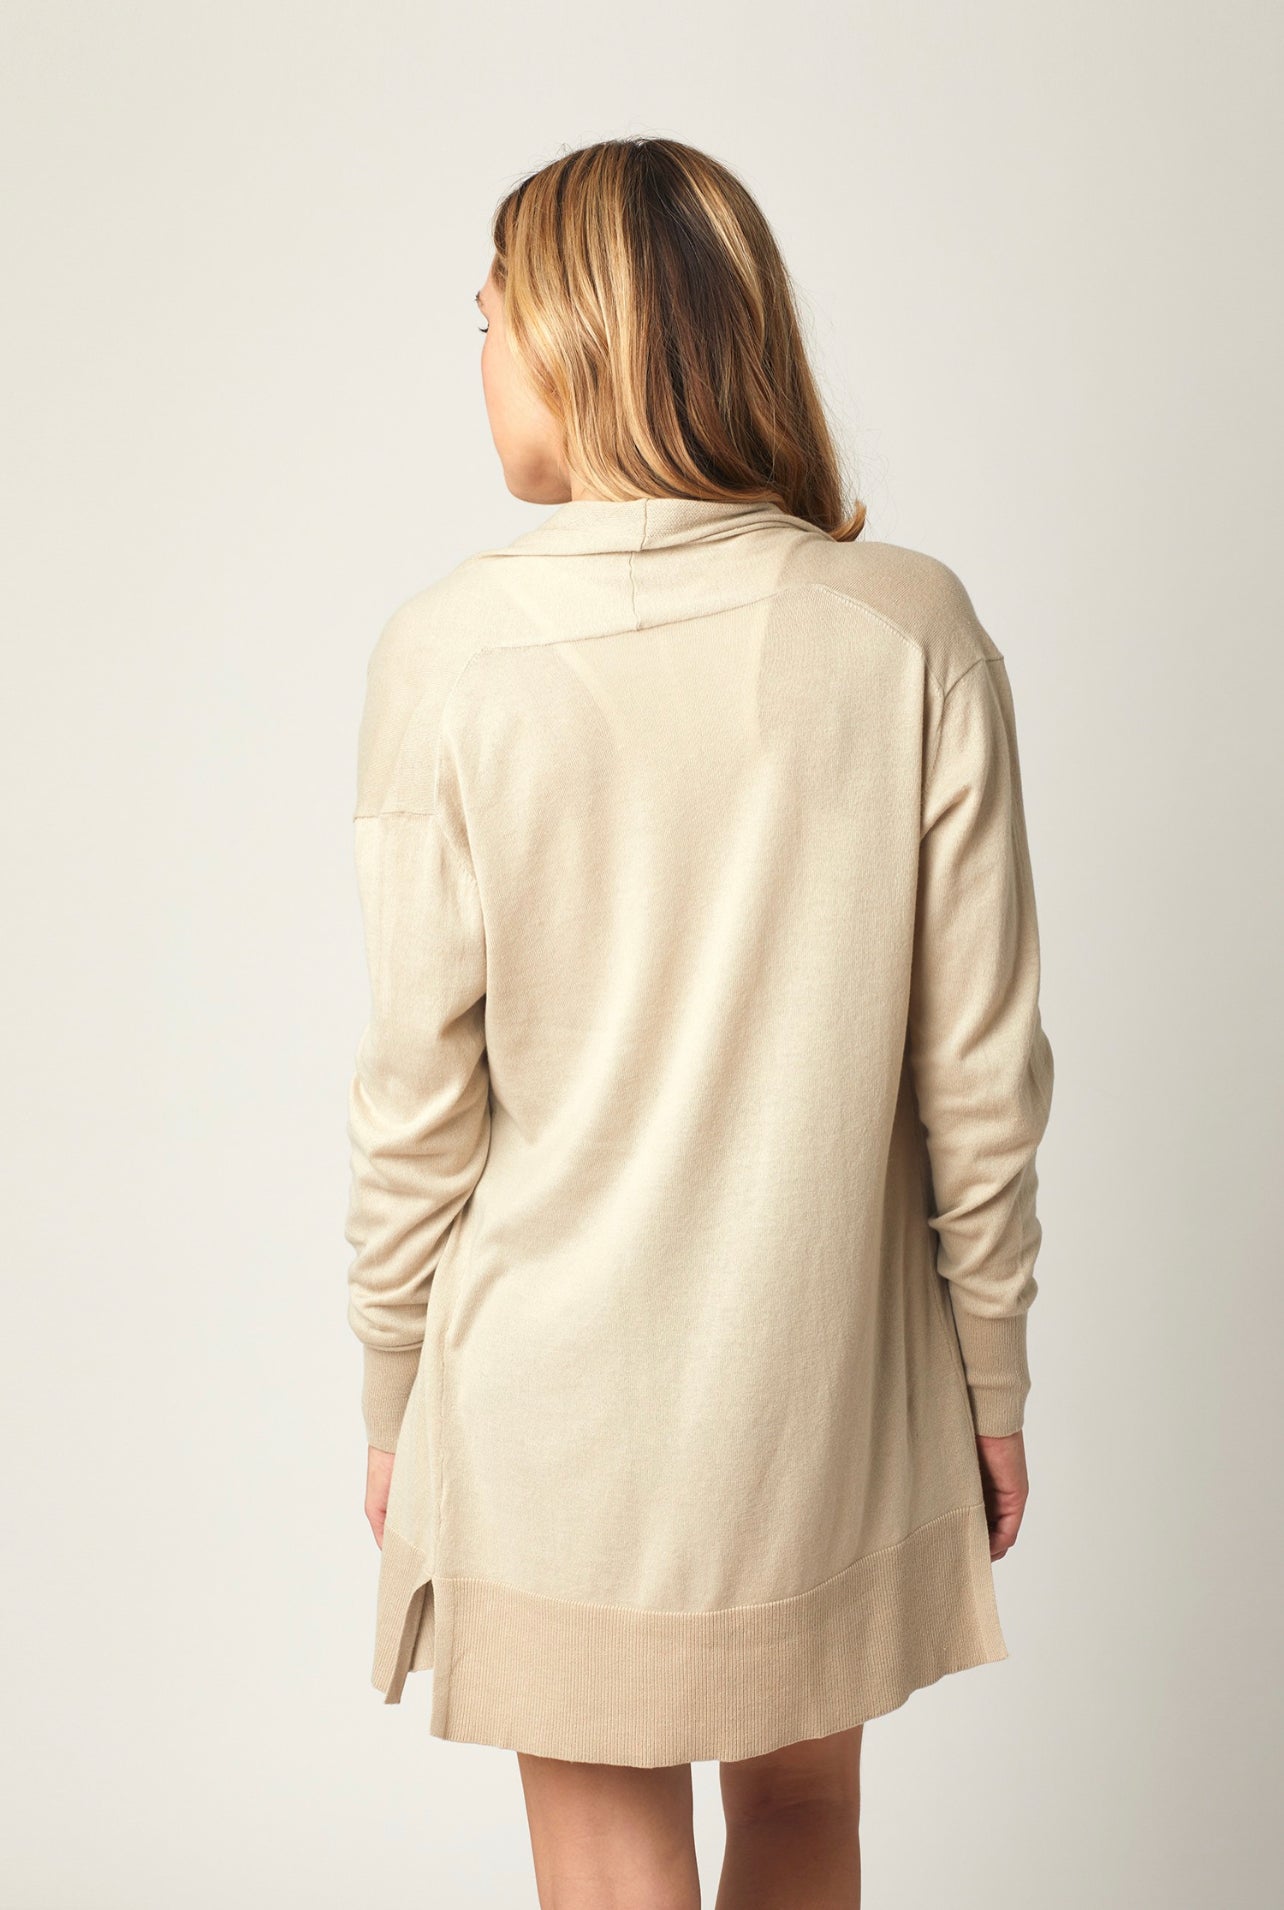 Blissed Out Cardigan - Neutral